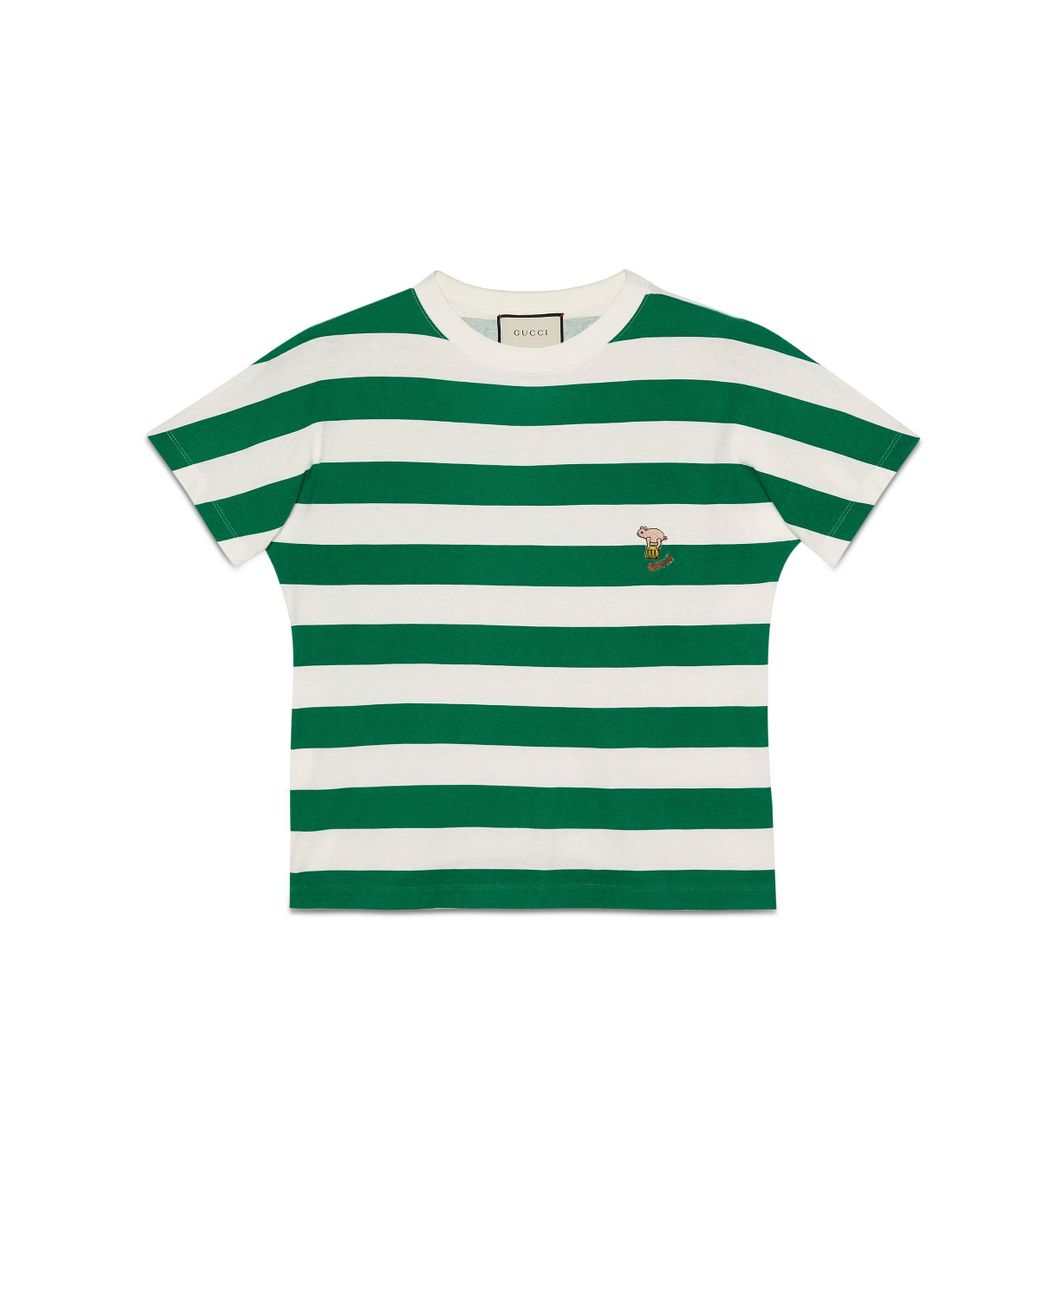 Gucci Cotton Striped T-shirt With Piglet Patch in Green for Men - Lyst